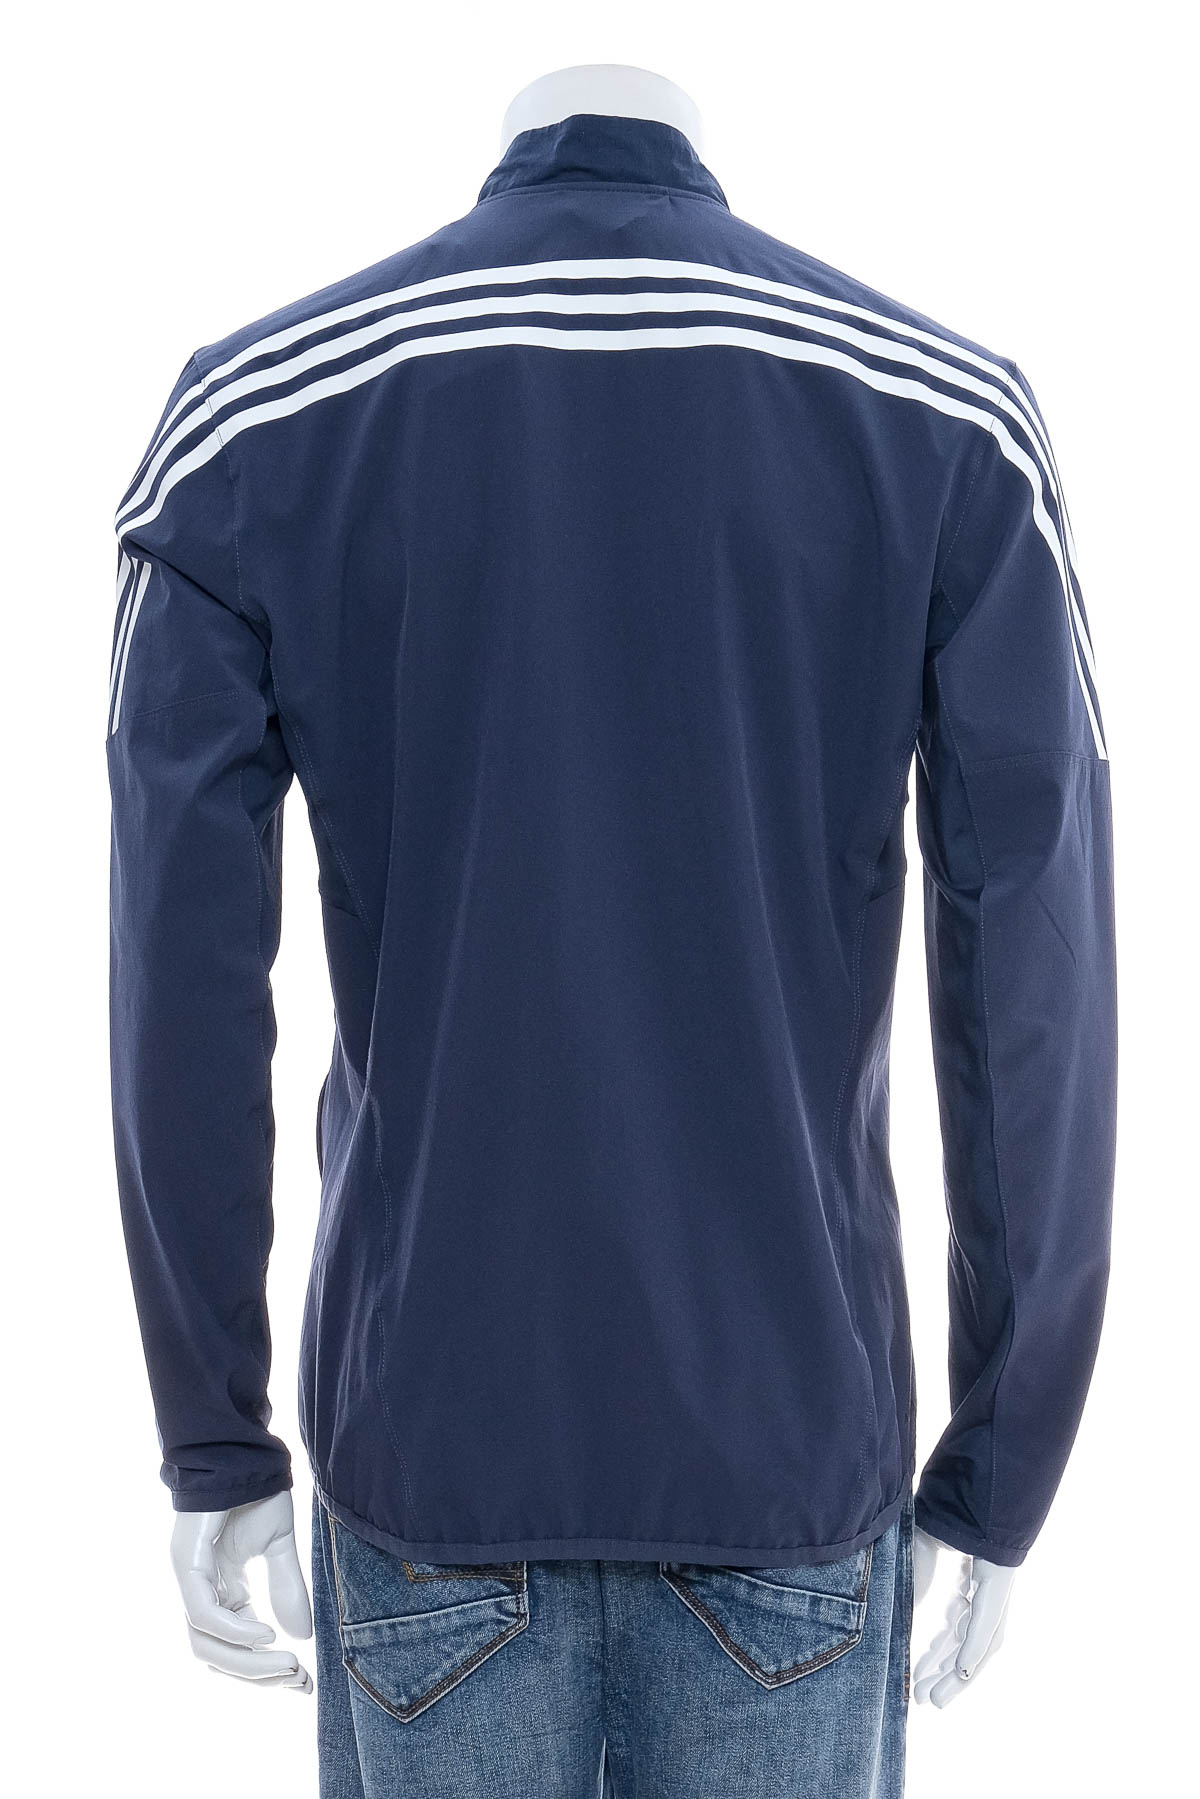 Male sports top - Adidas - 1